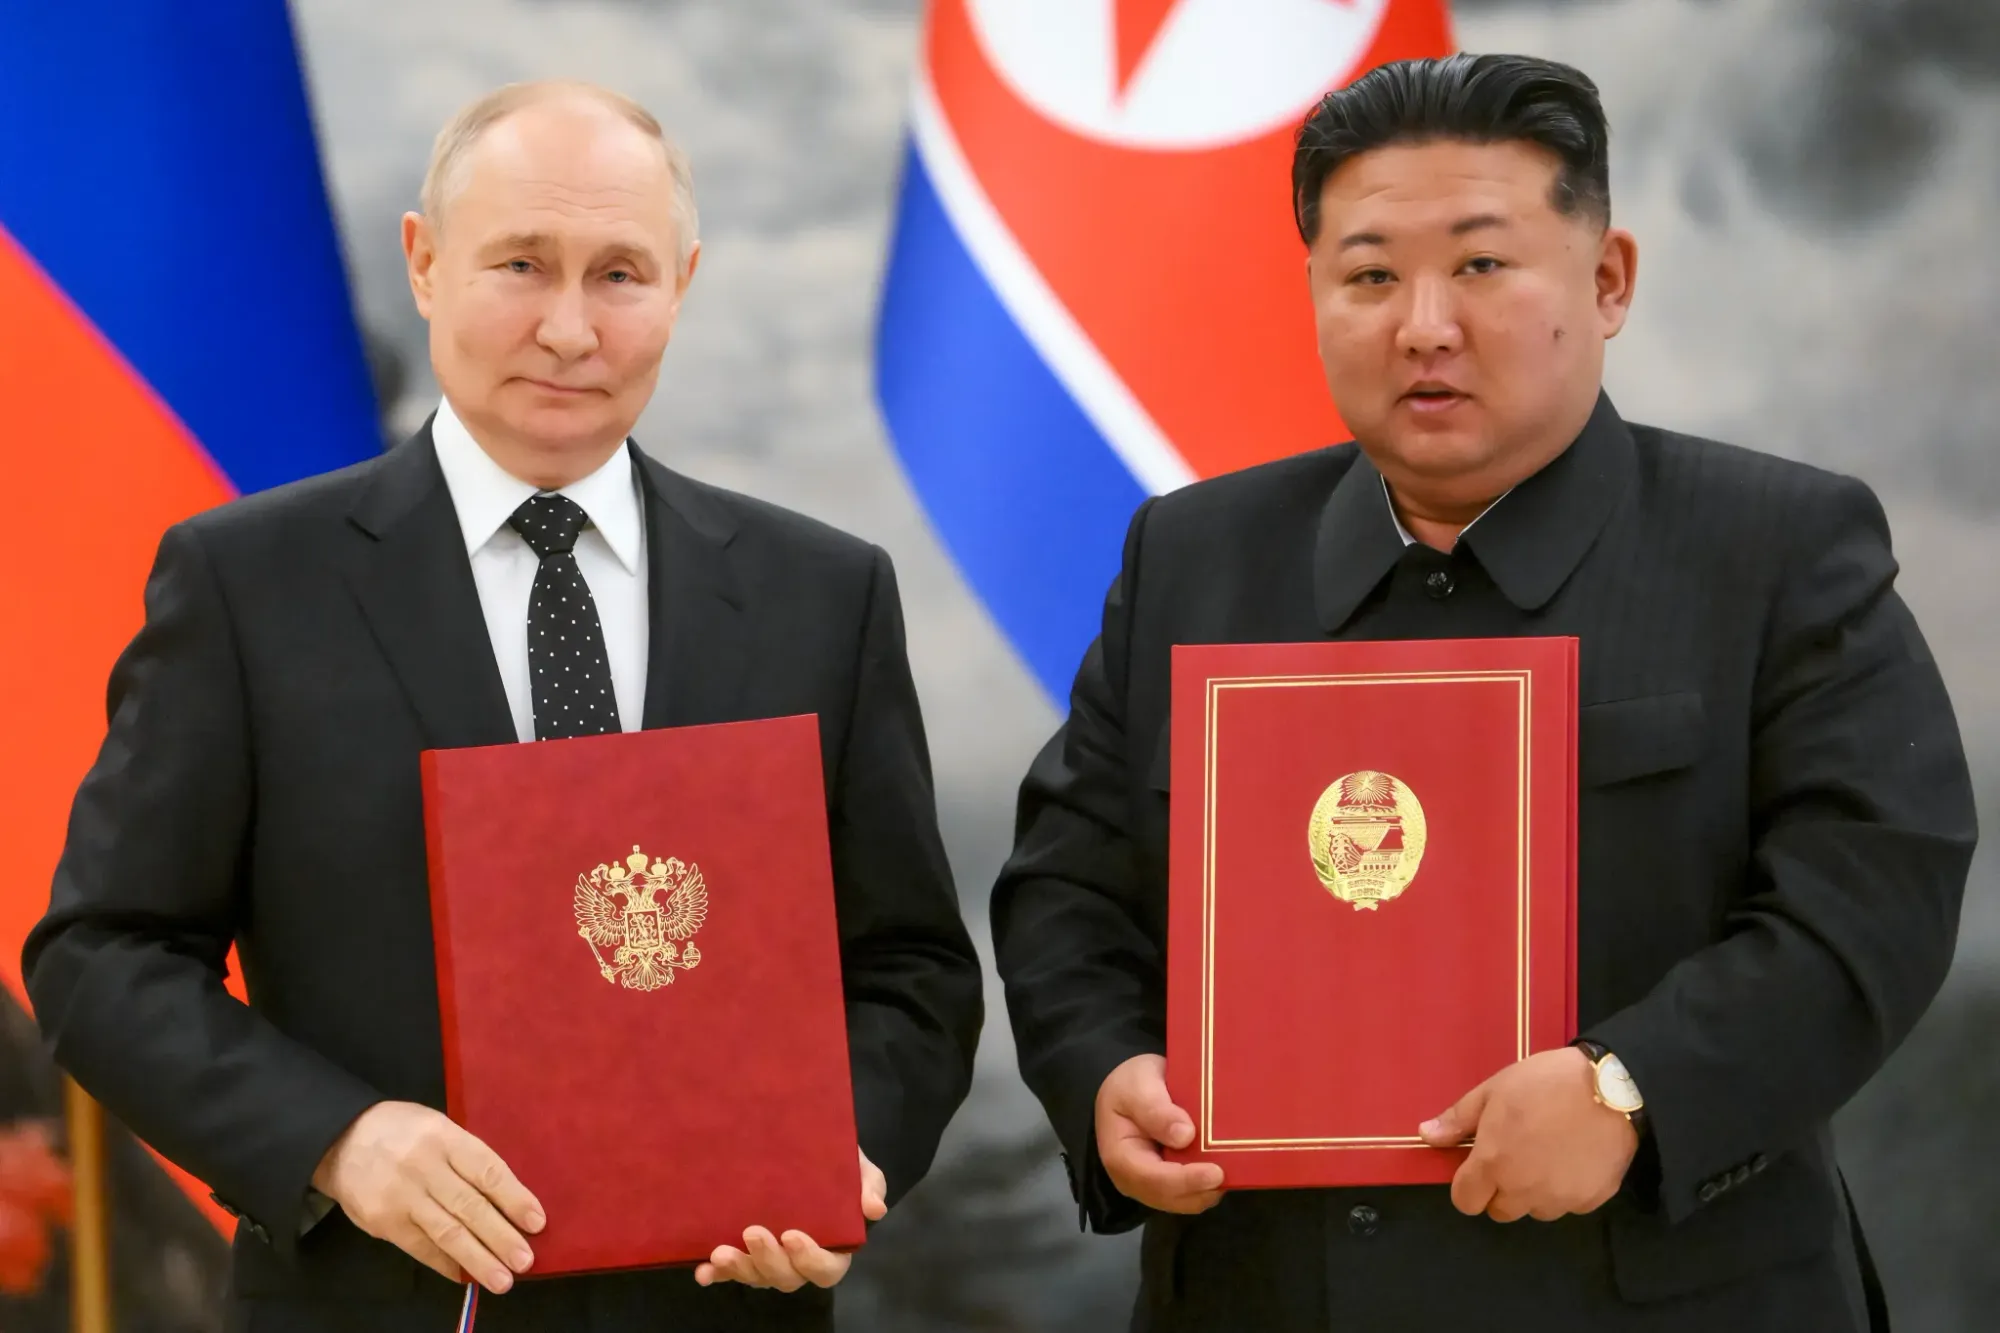 Russia-NK partnership, Scandals Dog Presidential Admin, Shipbuilding Surges